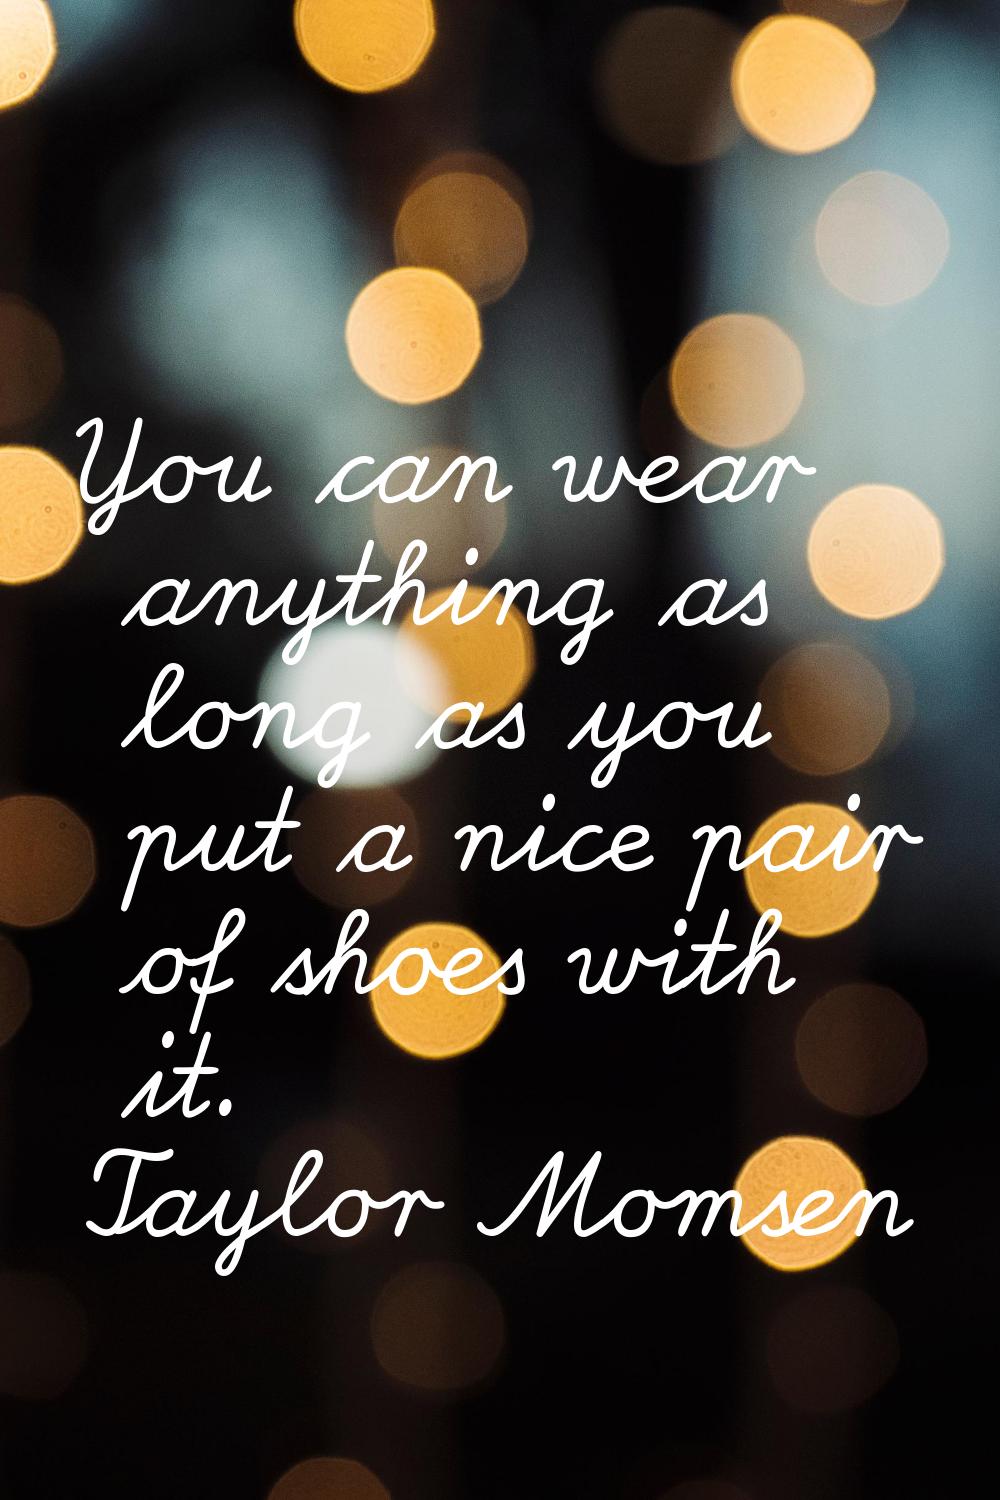 You can wear anything as long as you put a nice pair of shoes with it.